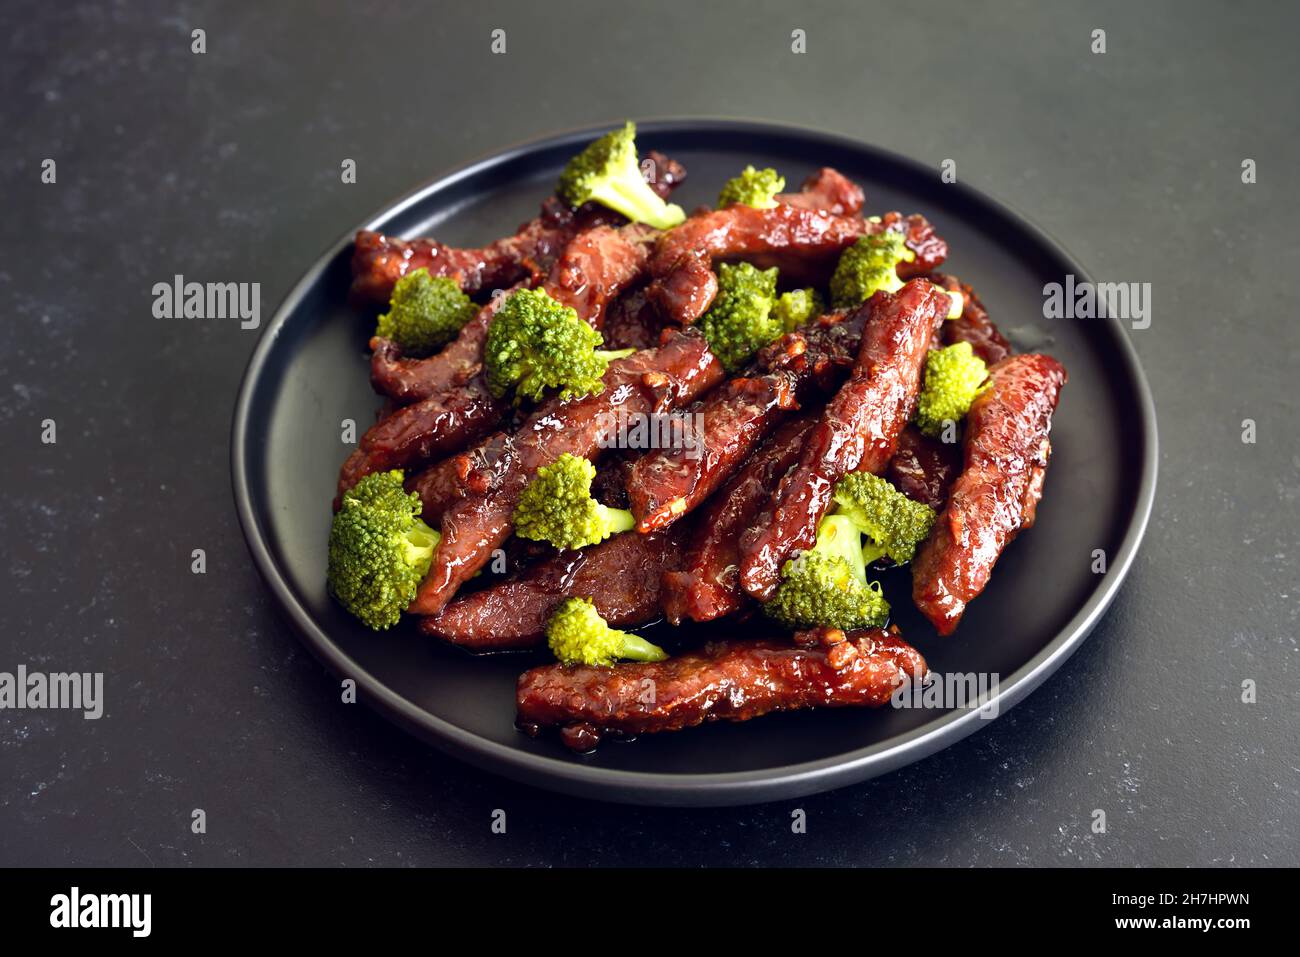 Beef stir-fry with broccoli on plate, close up view Stock Photo